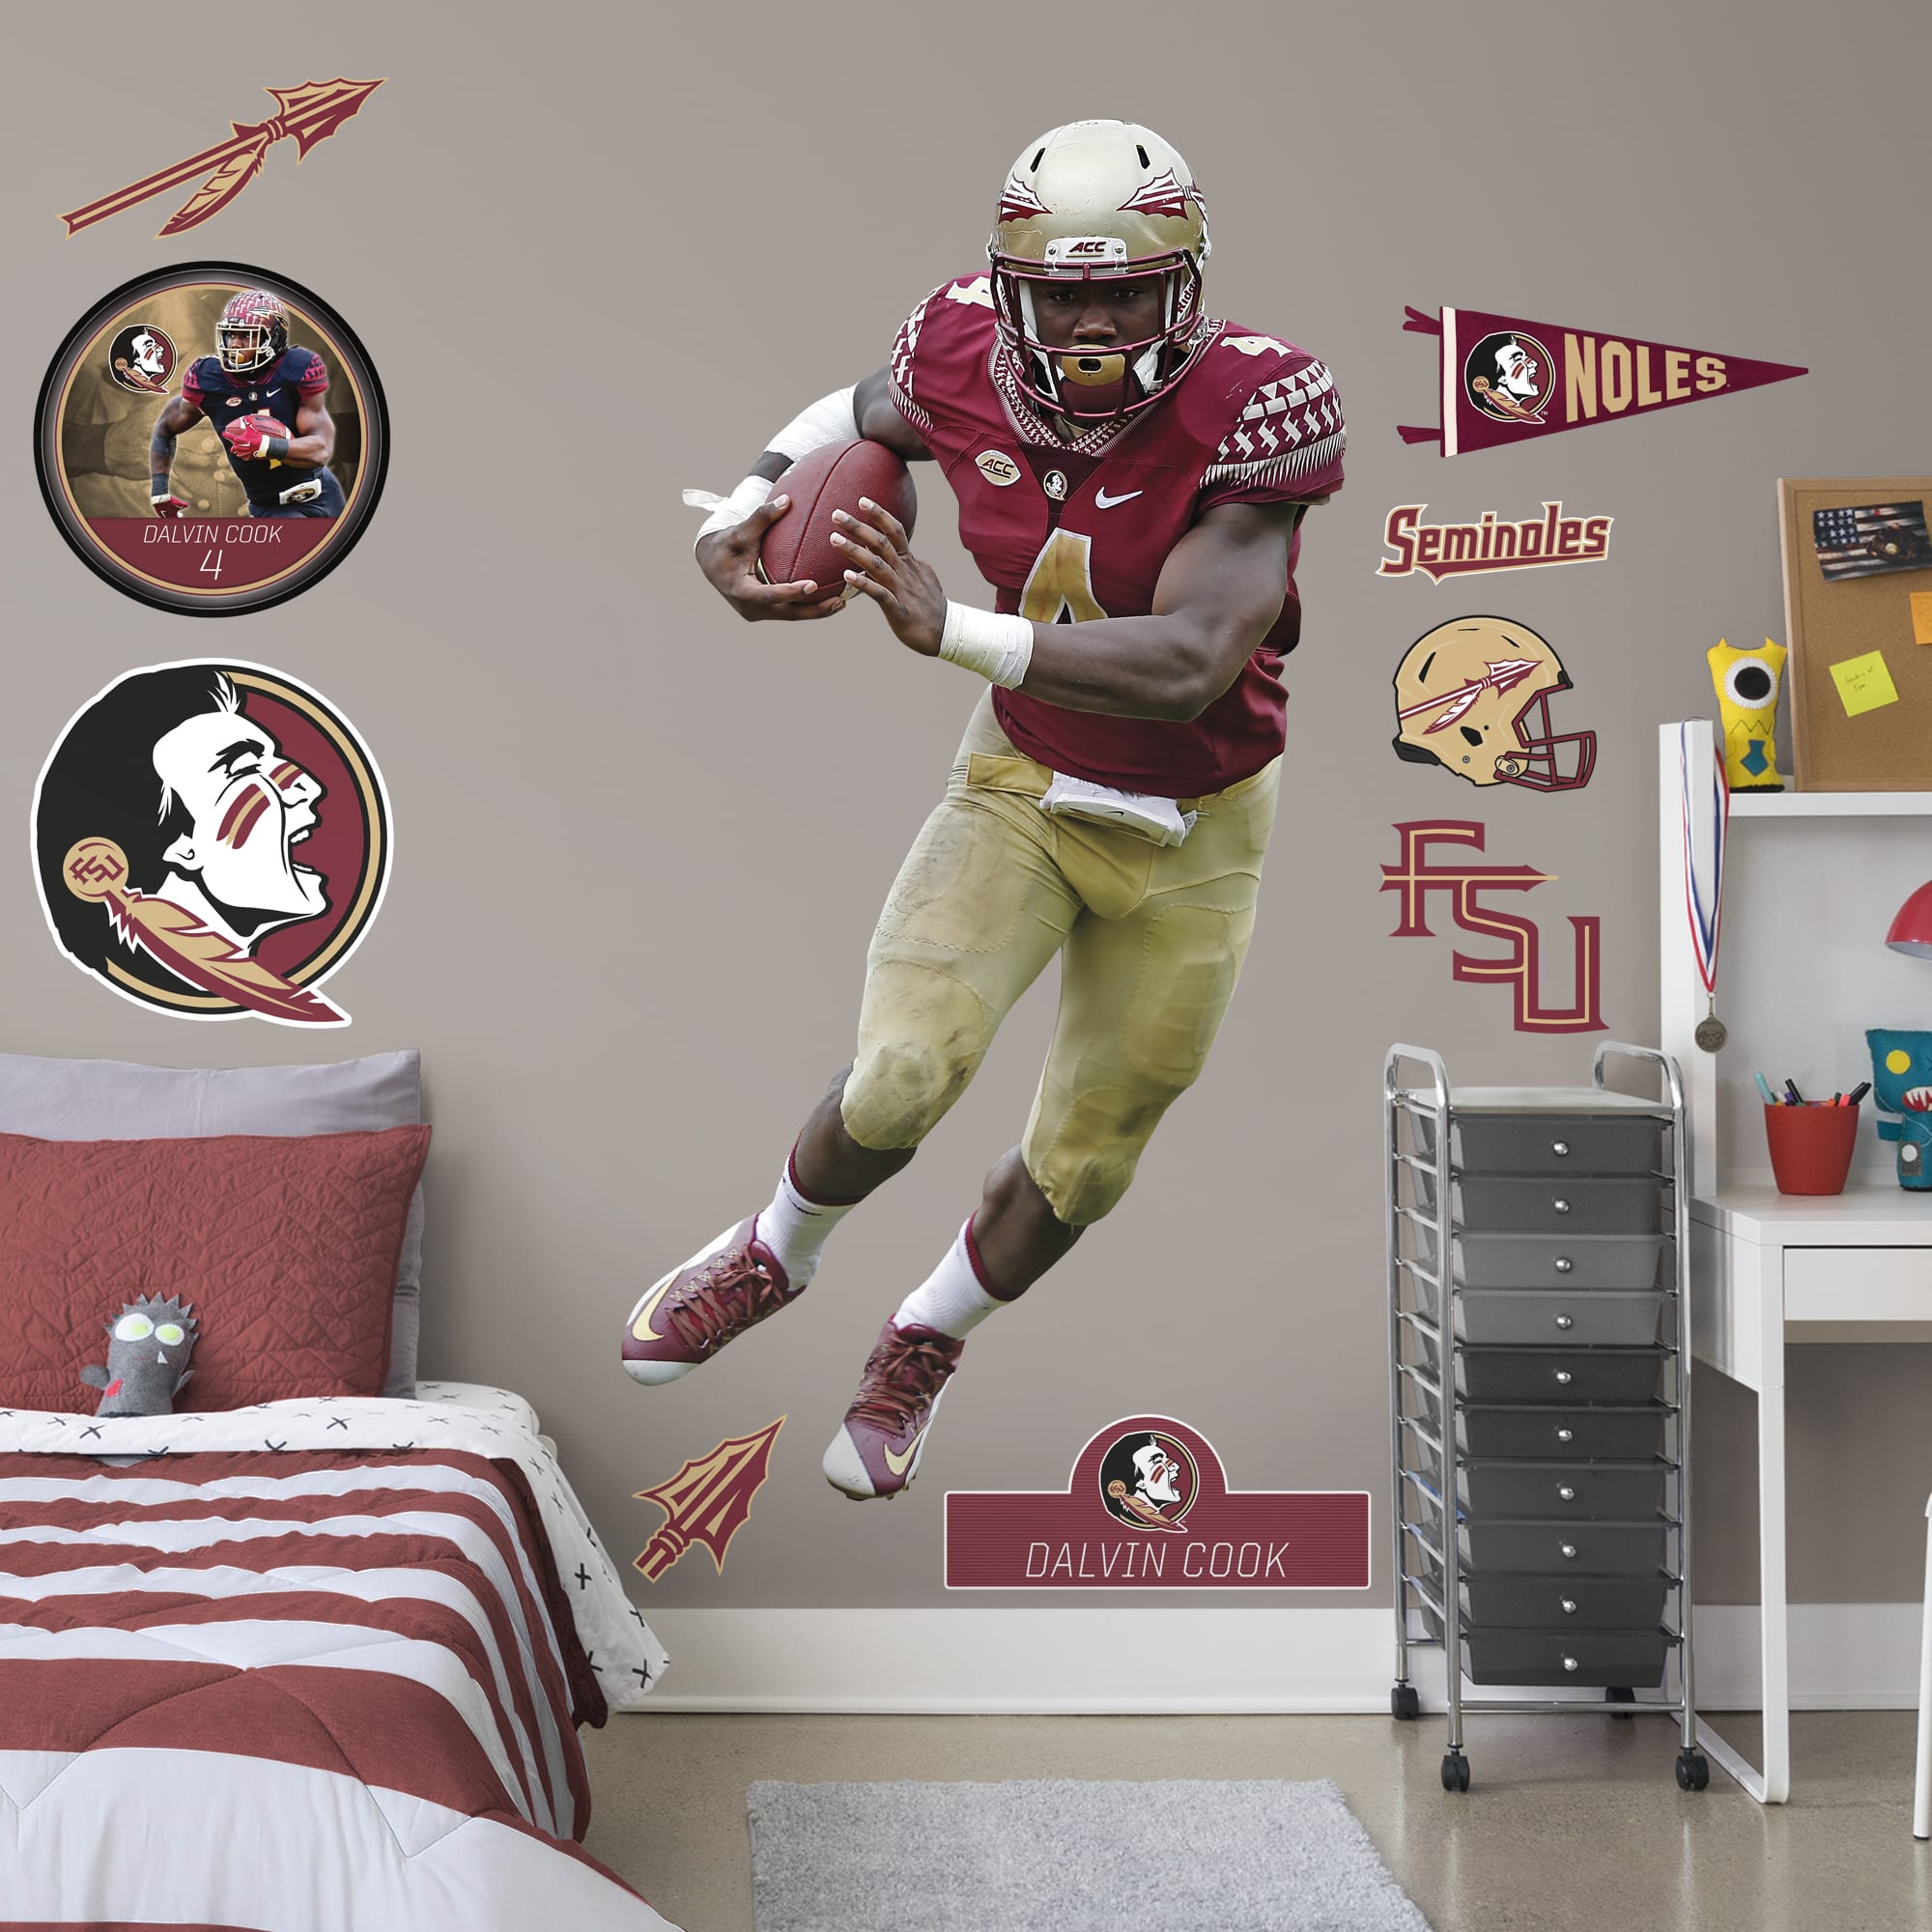 Dalvin Cook for Florida State Seminoles: Florida State - Officially Licensed Removable Wall Decal Life-Size Athlete + 9 Decals (